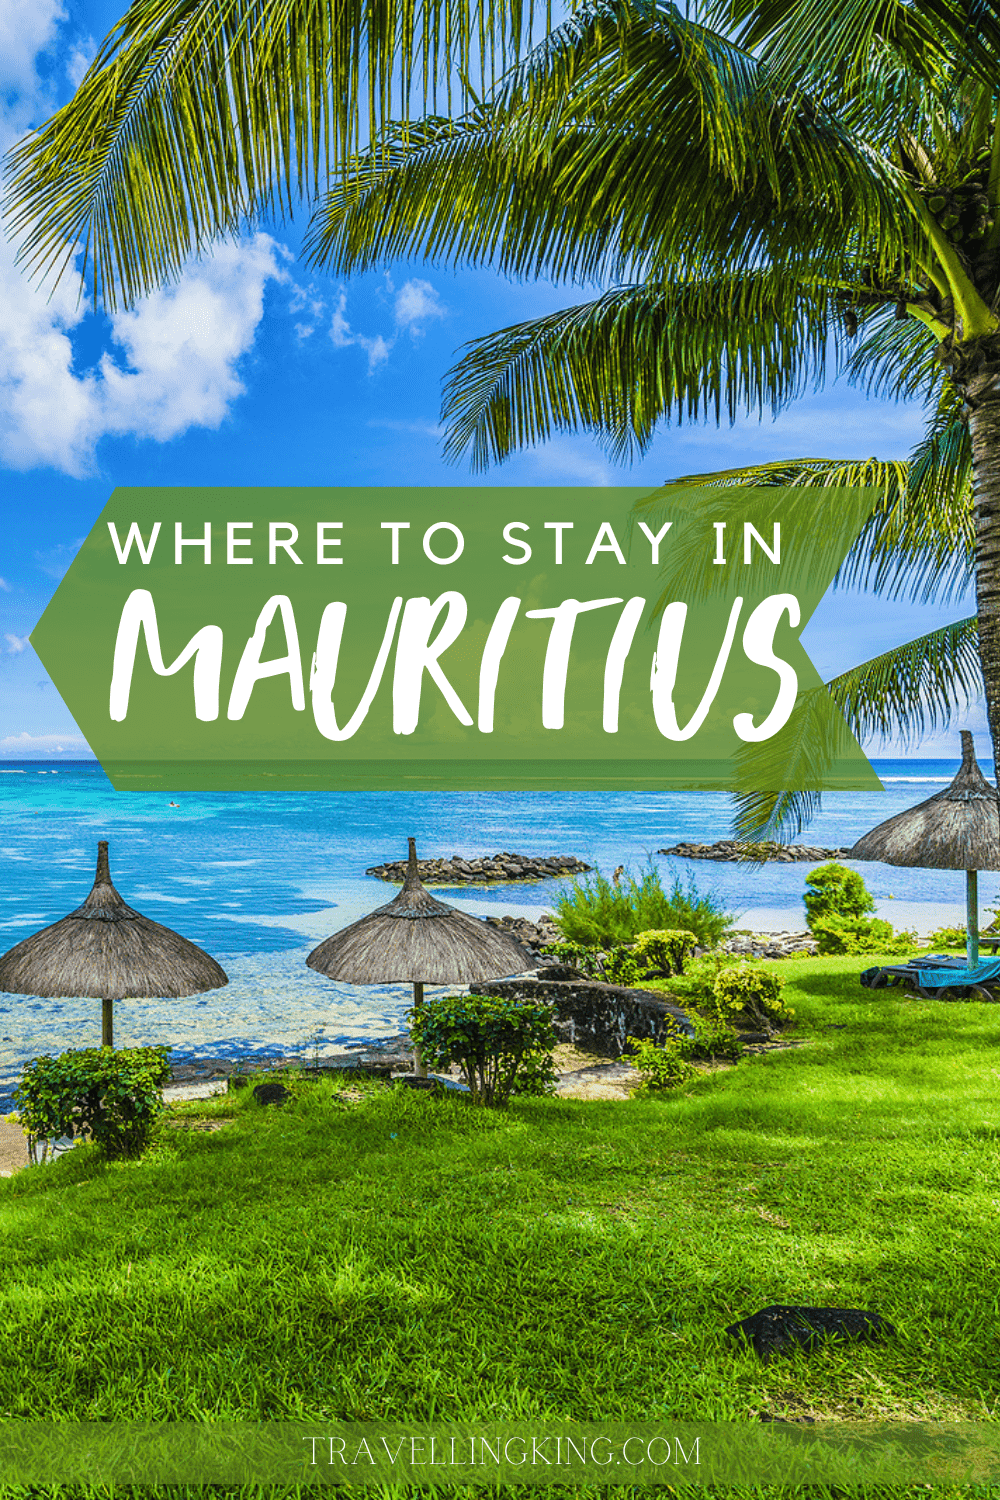 Where to stay in Mauritius